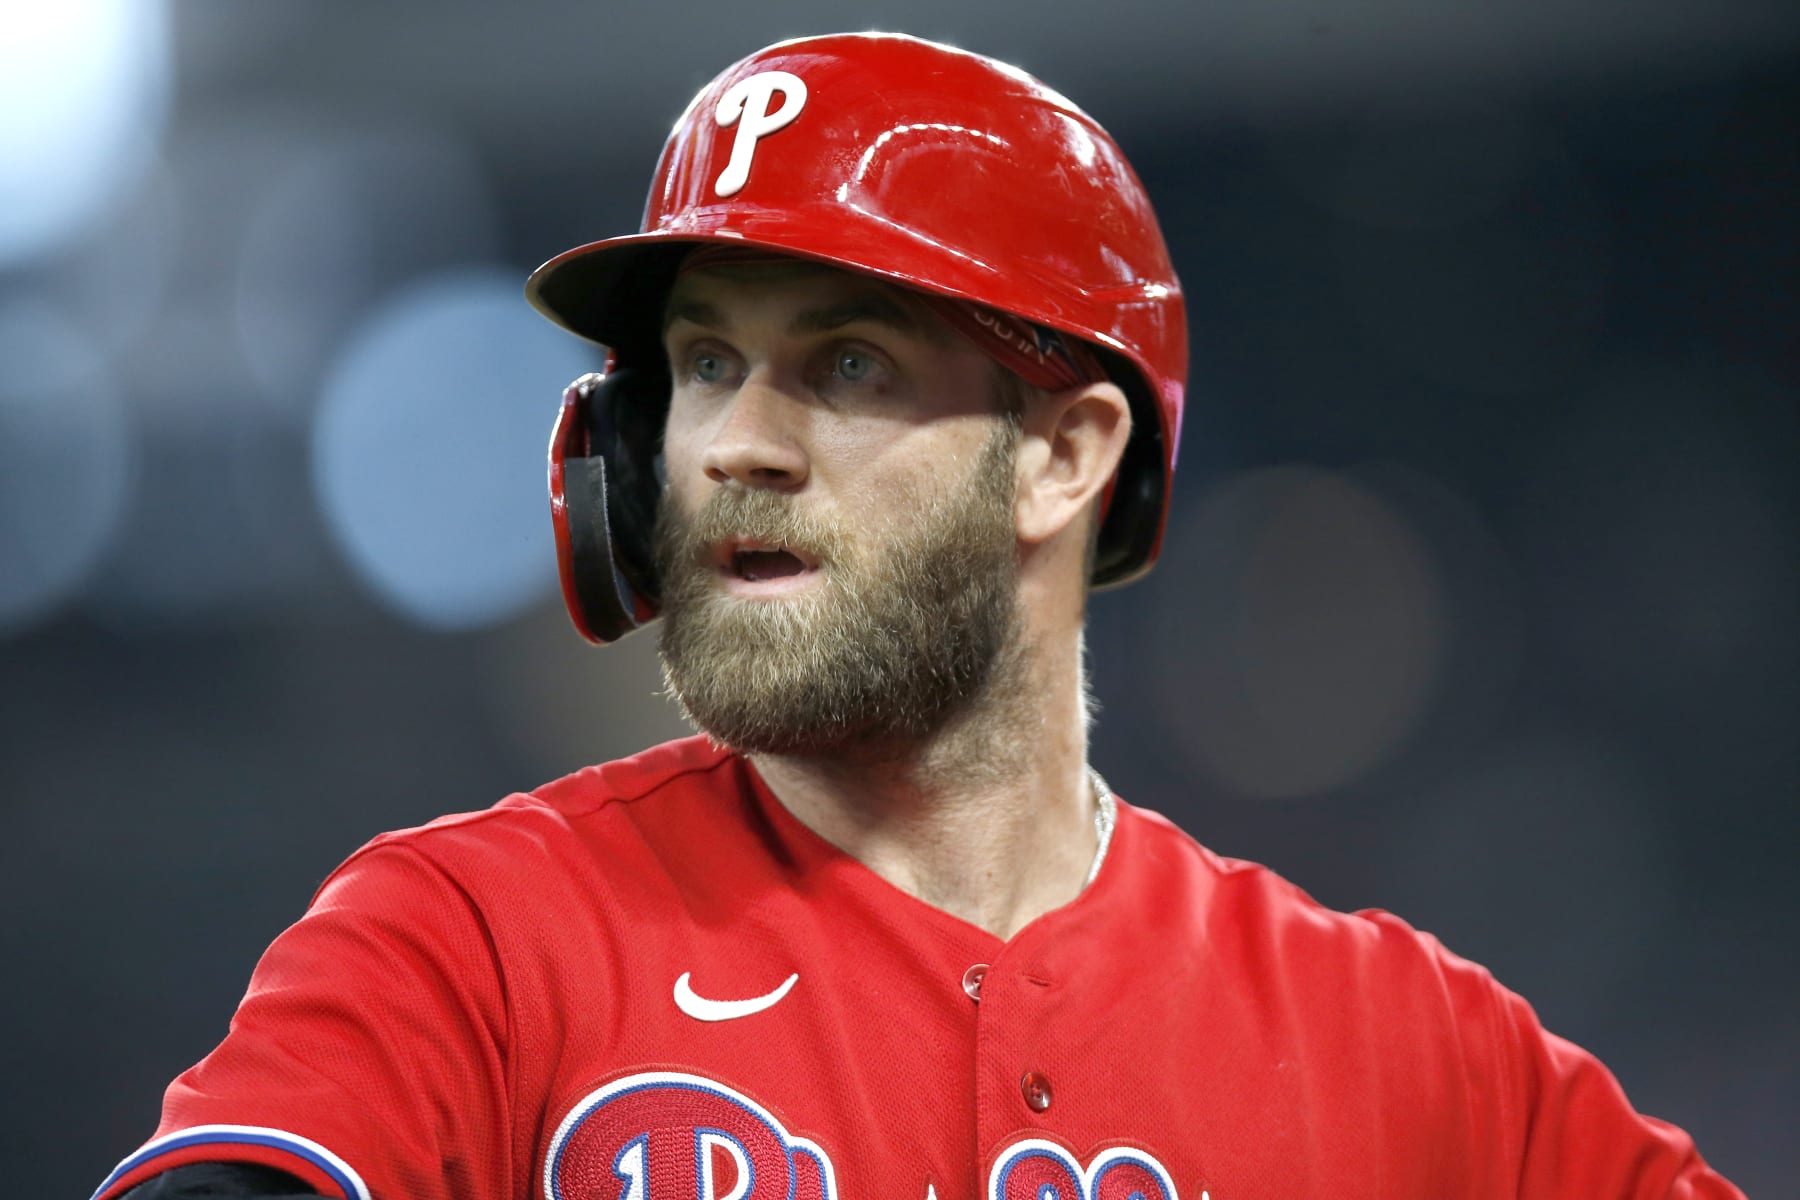 Bryce Harper carries Phillies into 1st World Series since 2009